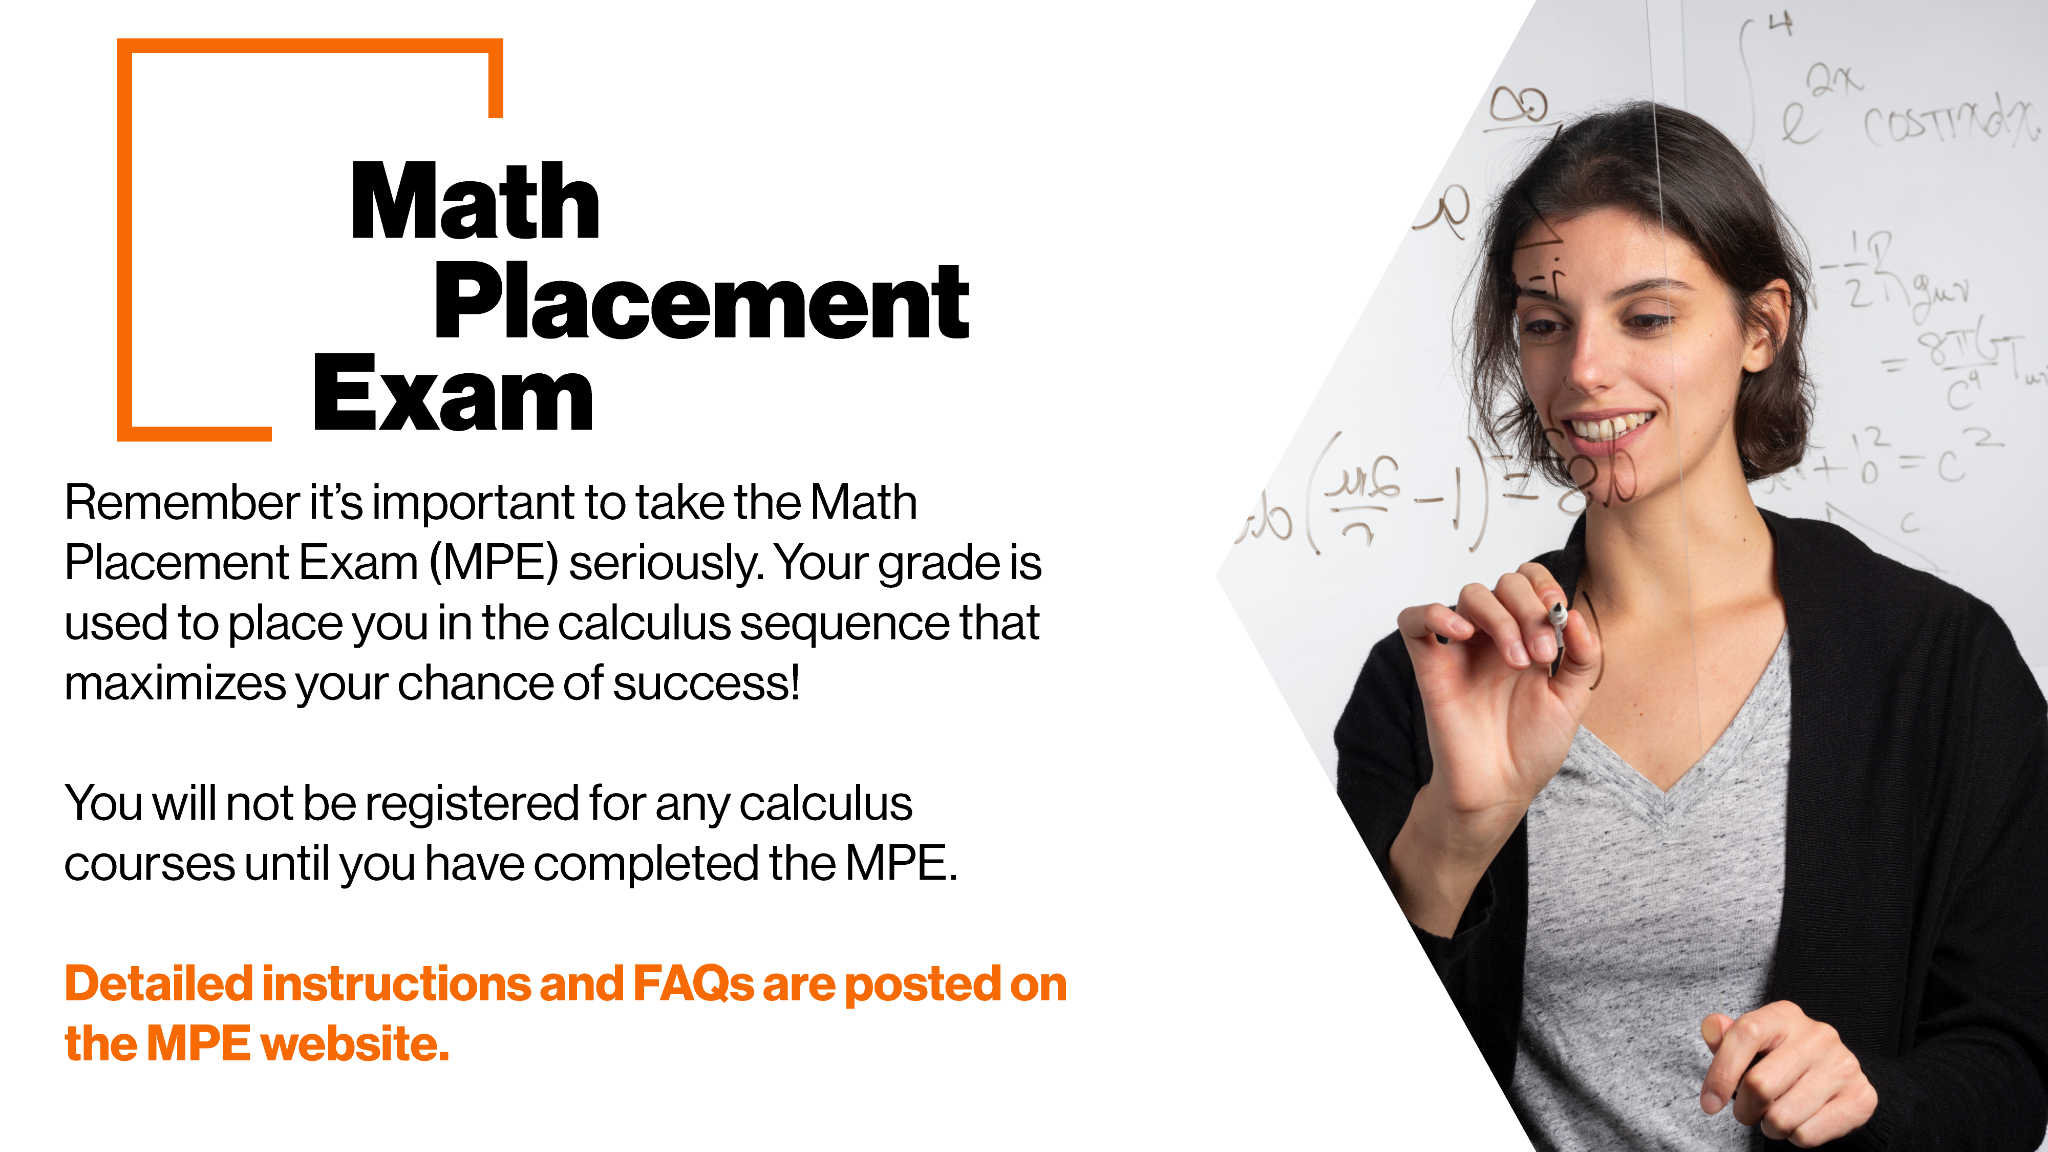 Learn more about the Math Placement Exam